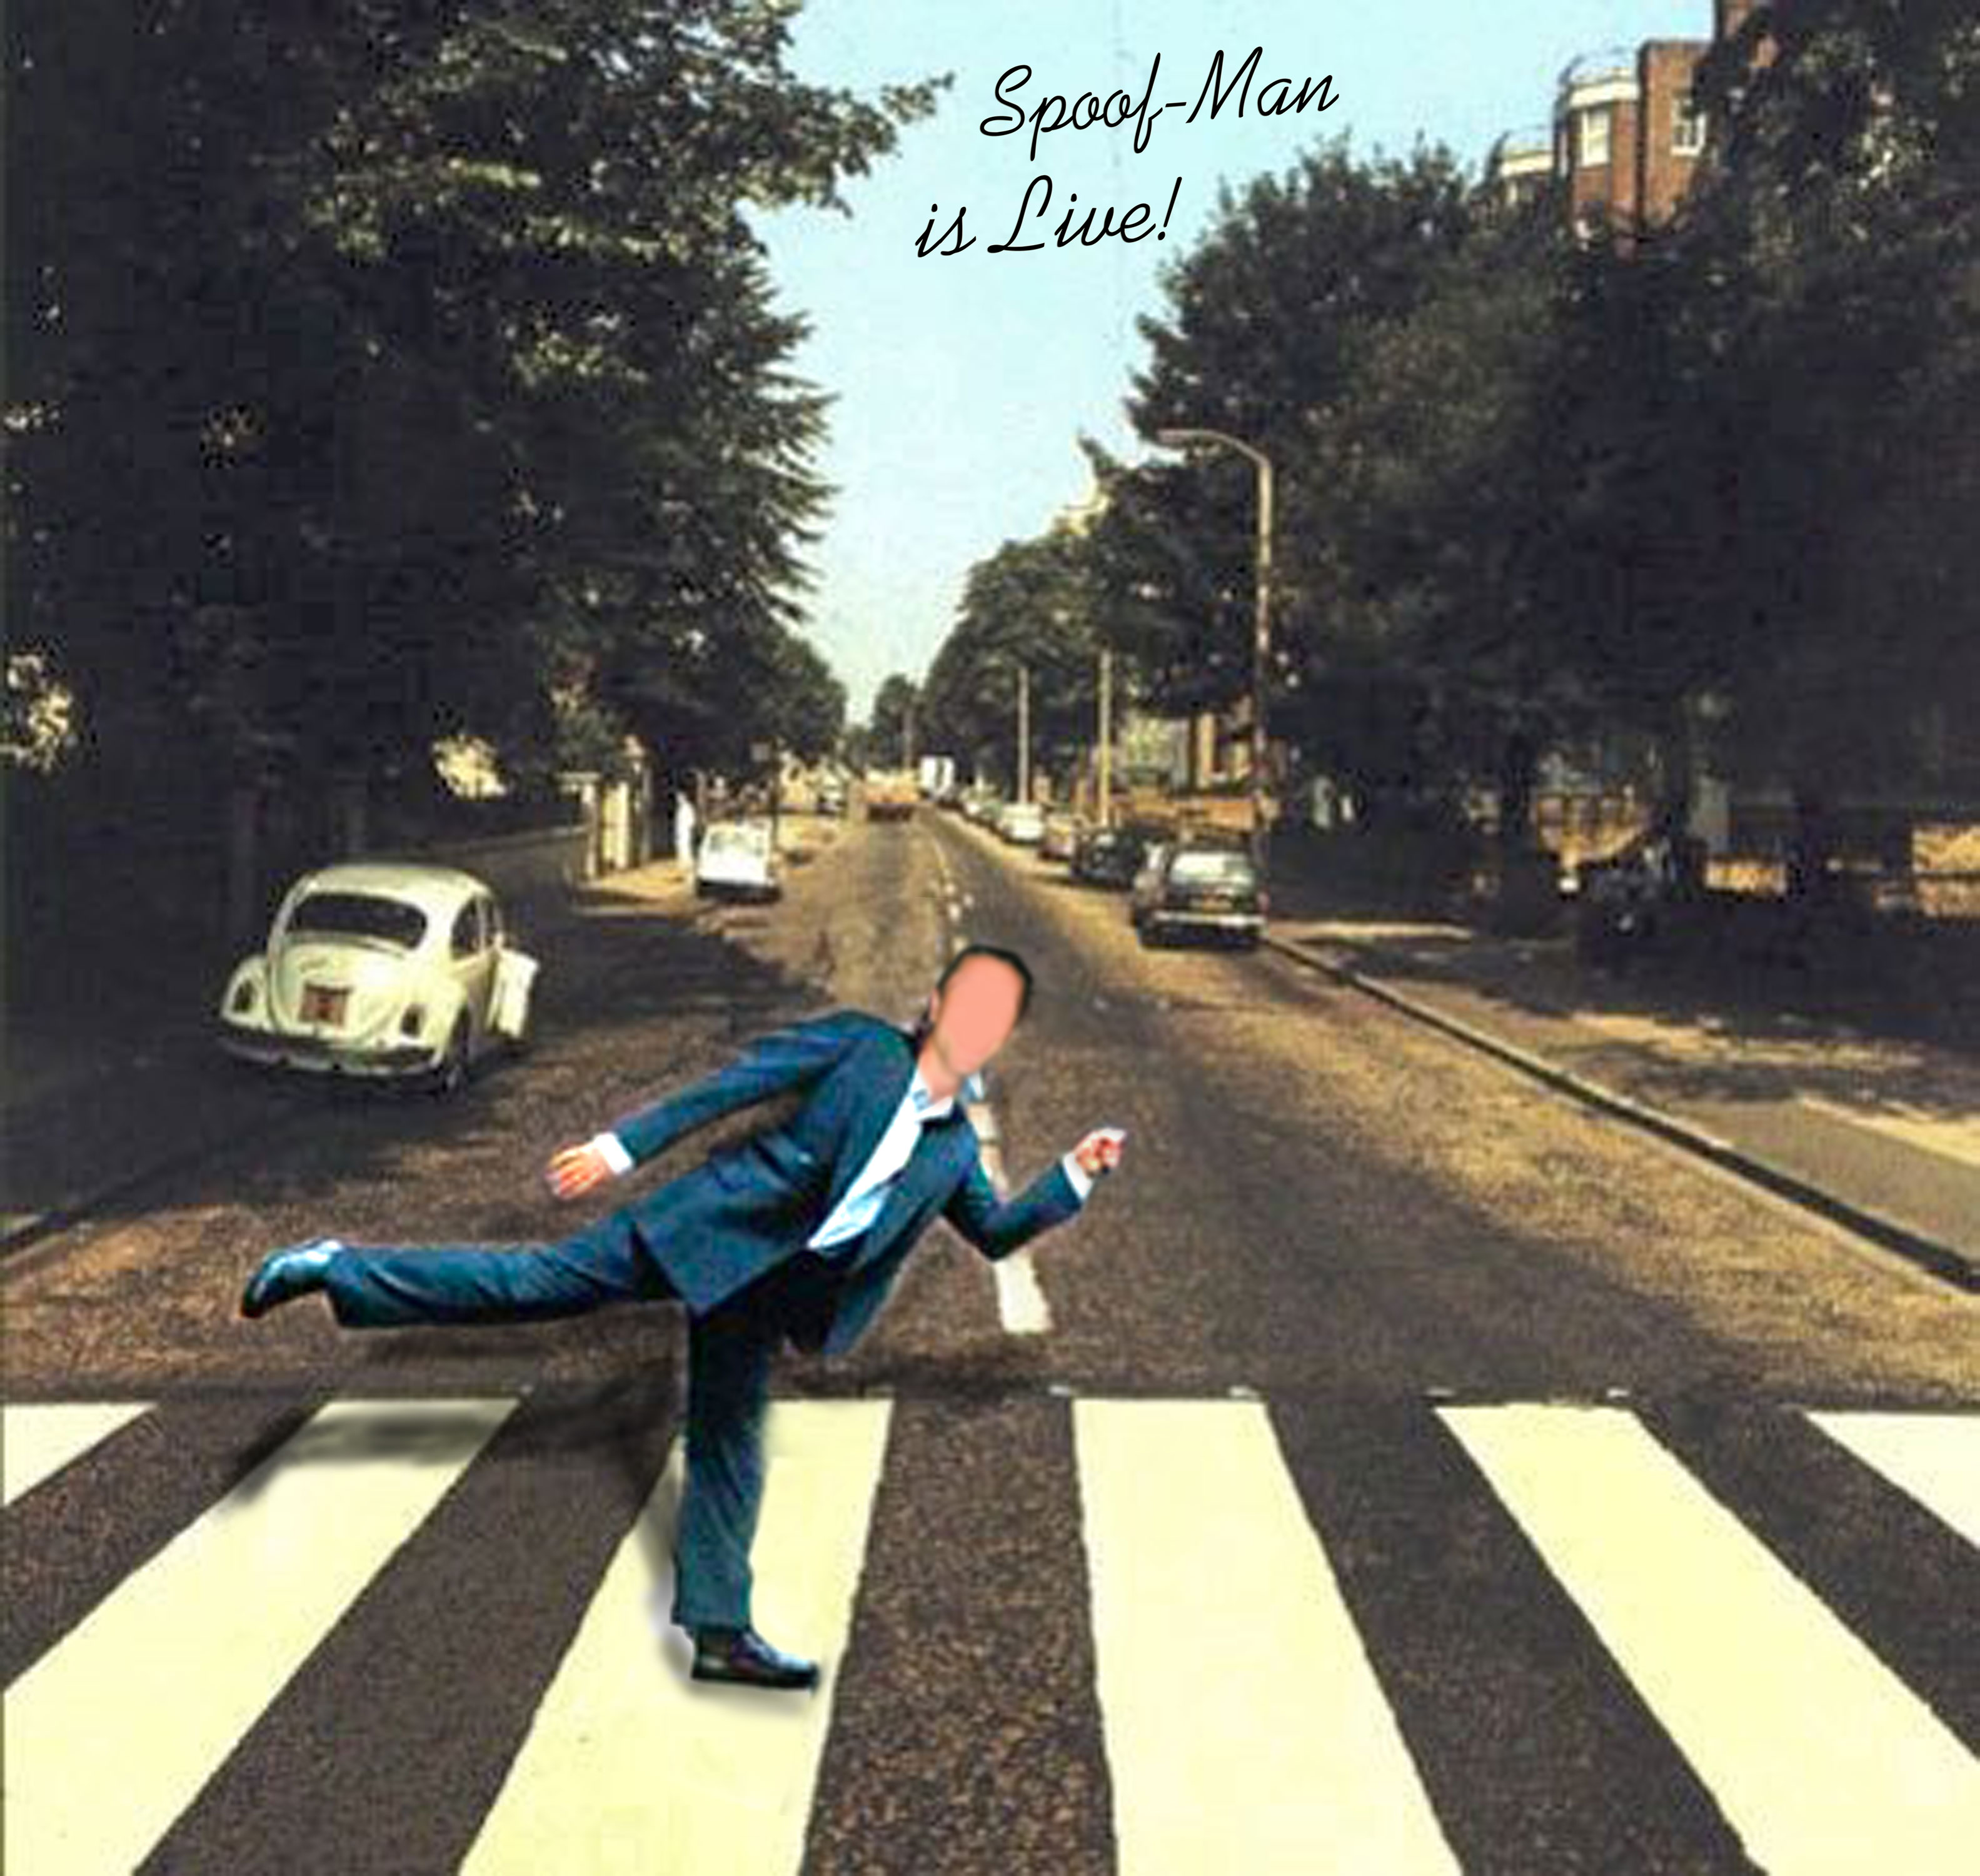 Album cover parody of Abbey Road (1990) by The Beatles